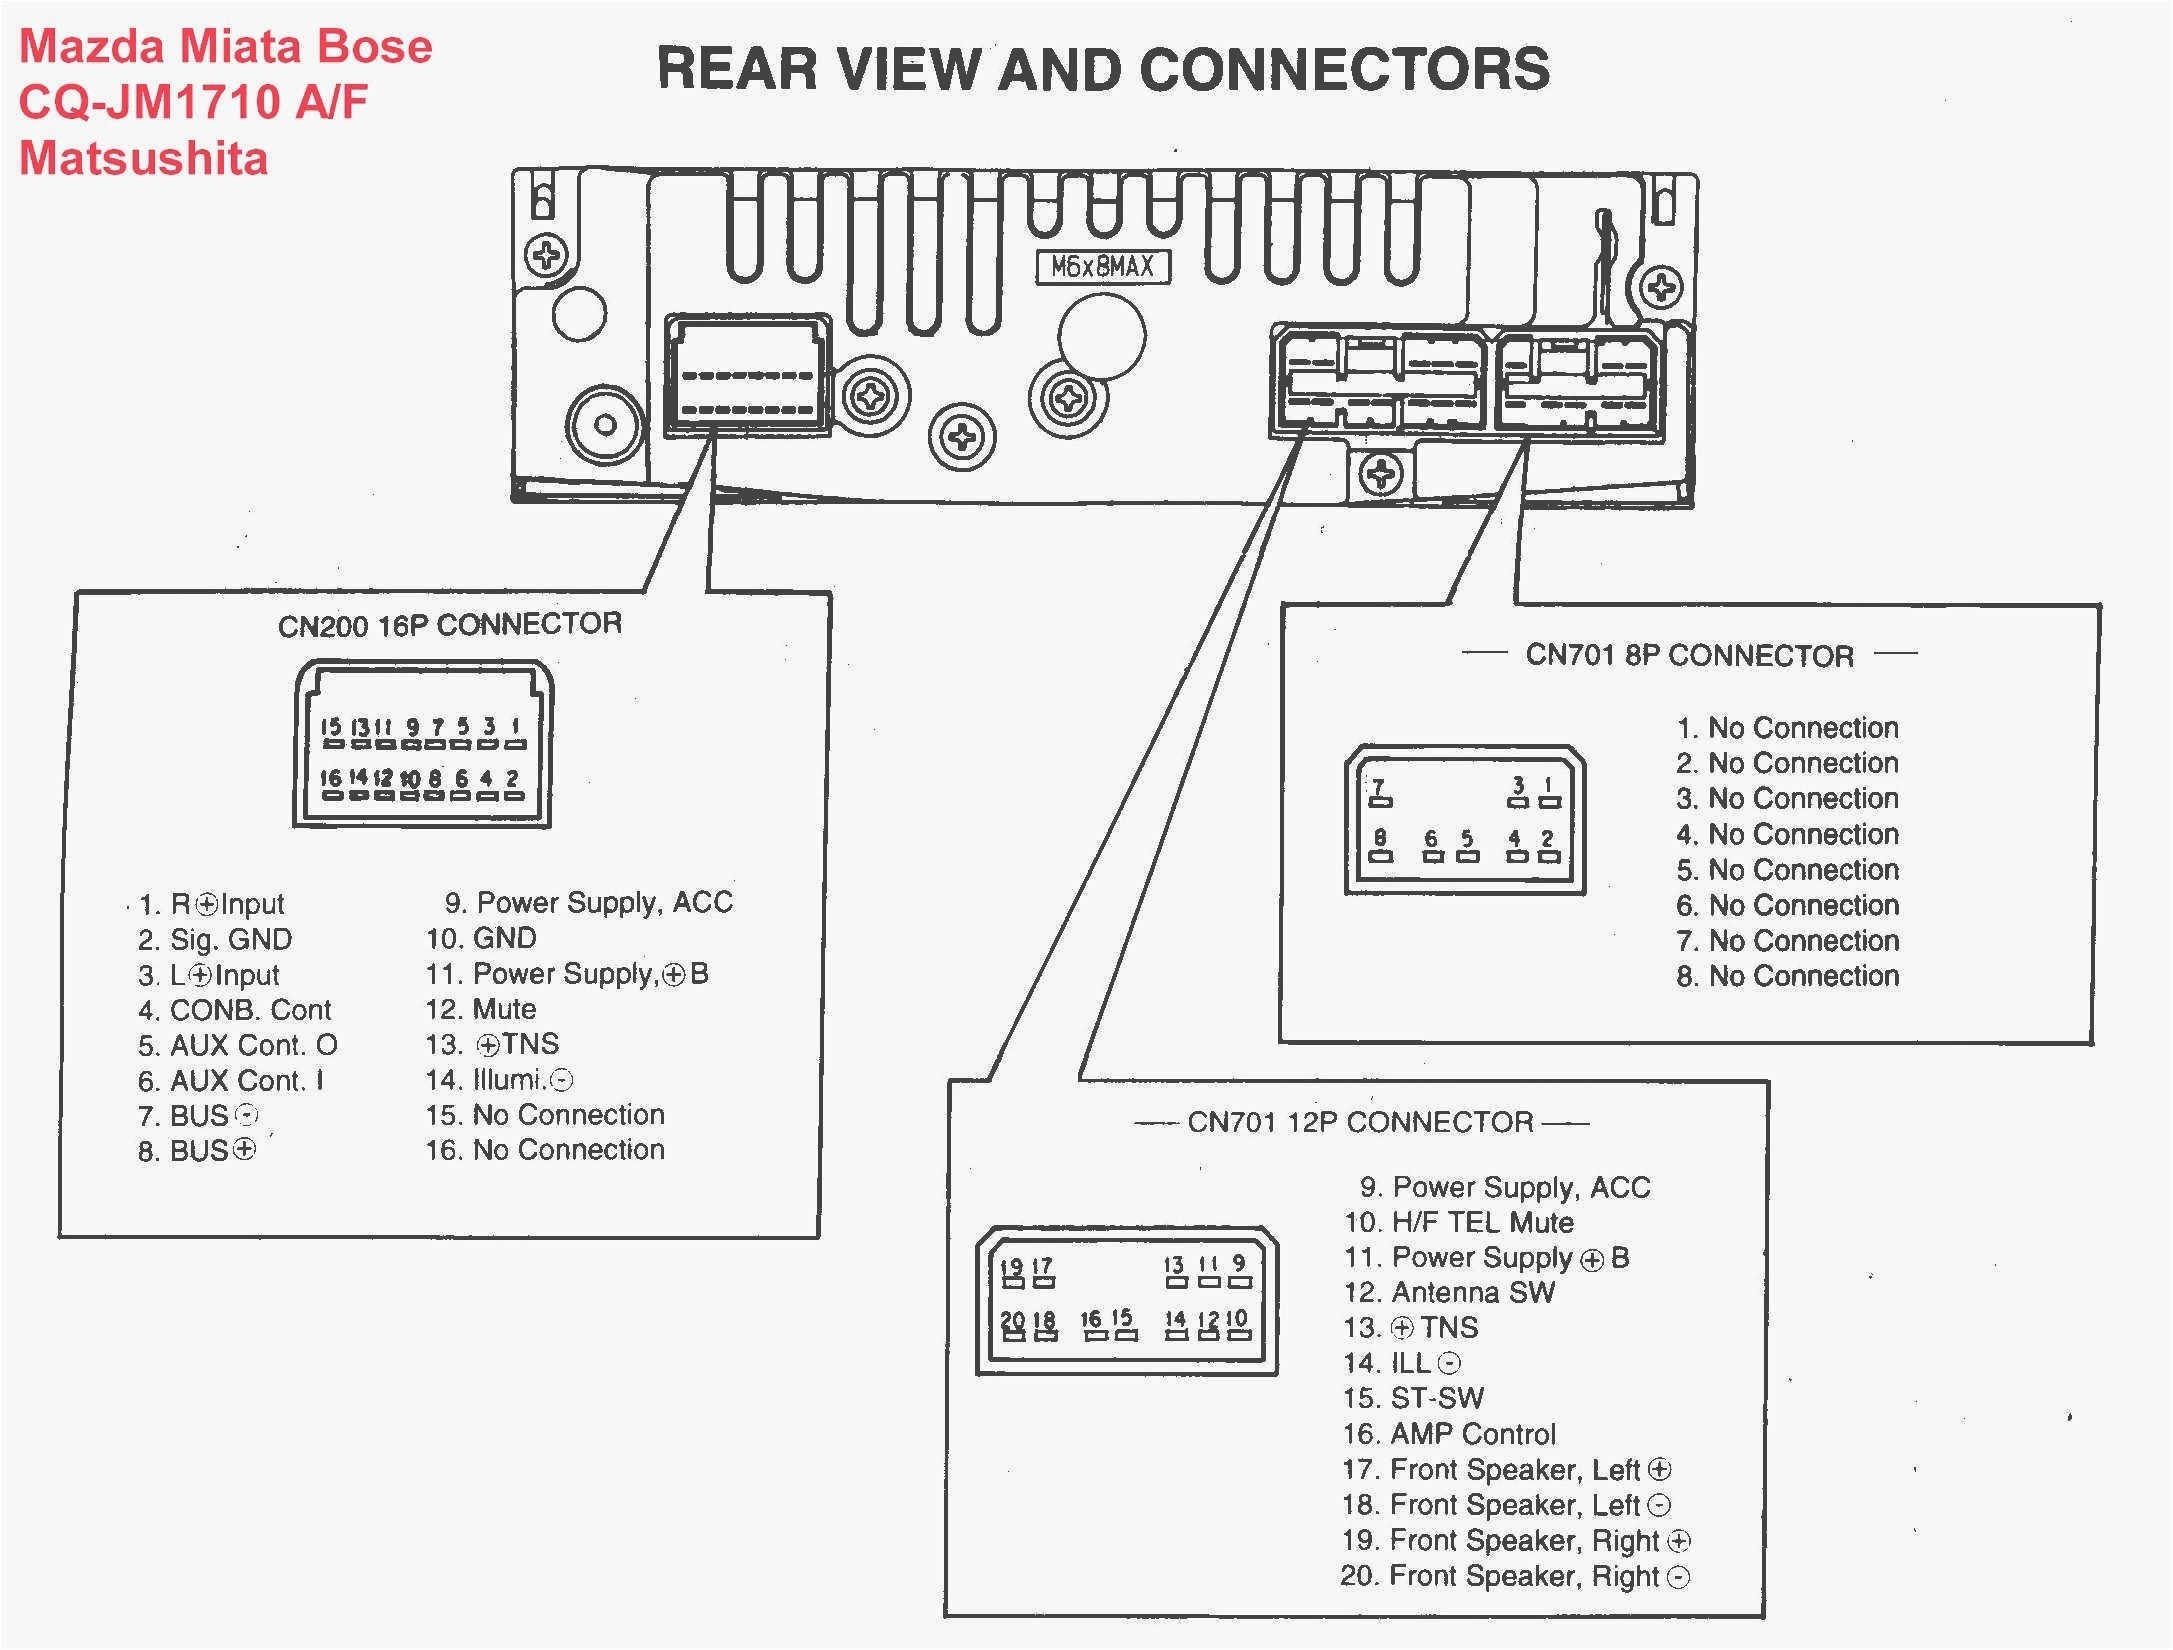 pioneer deh 245 wiring harness diagram extended wiring diagram pioneer deh 245 wiring harness diagram wiring